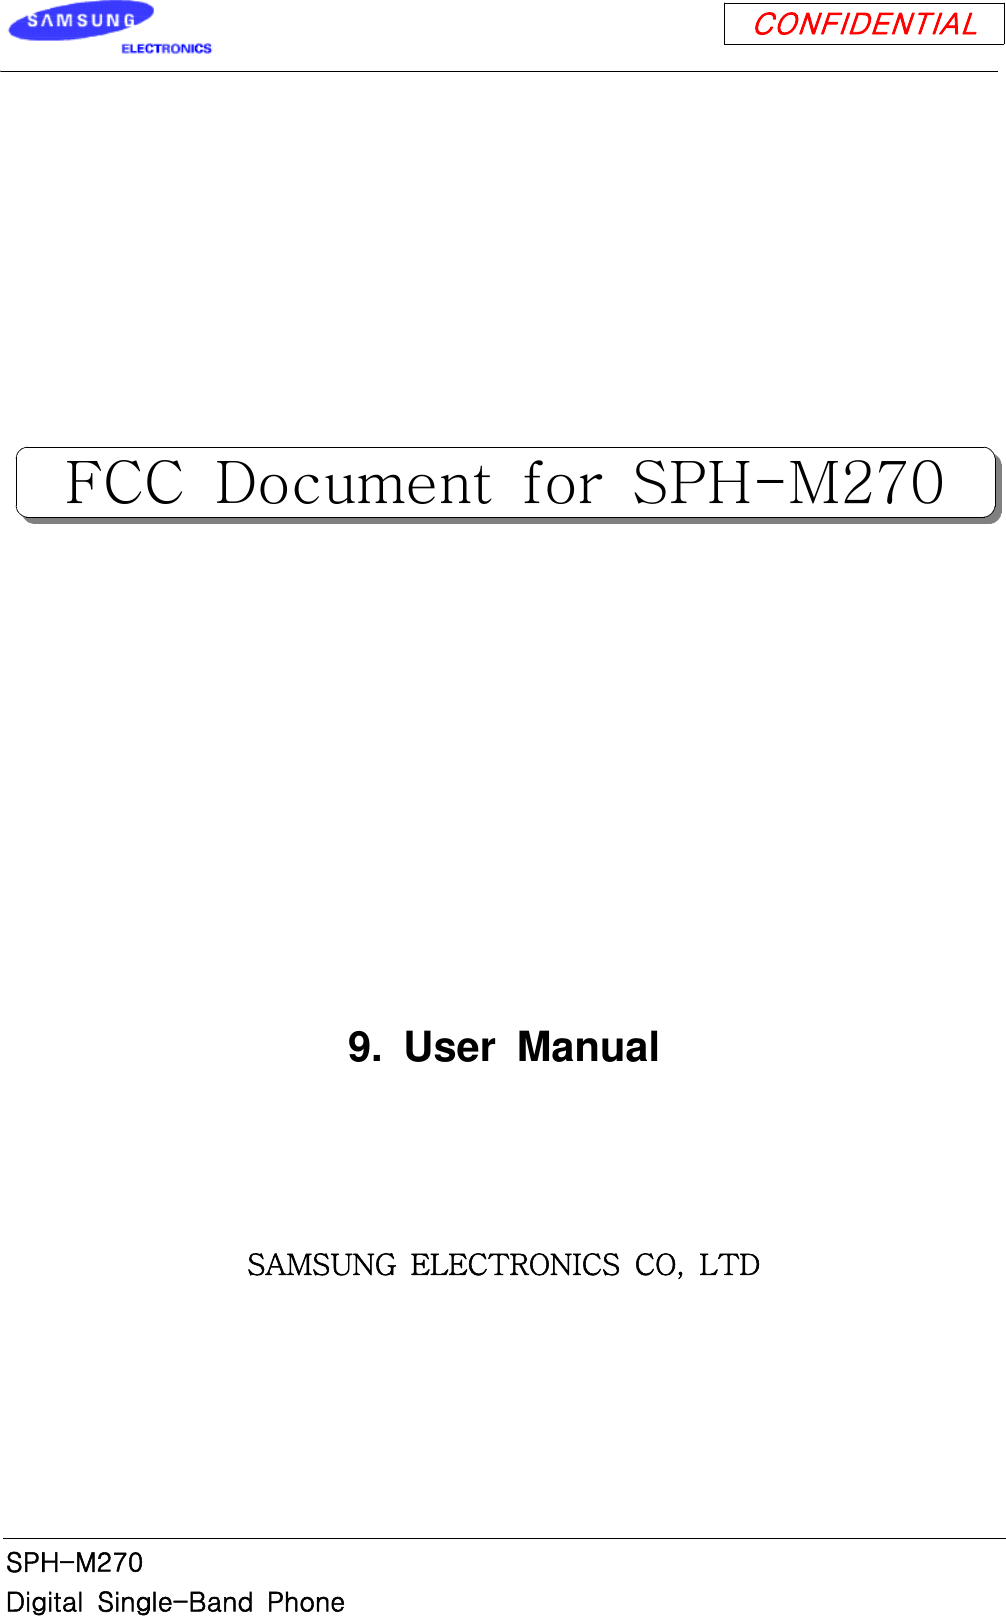 CONFIDENTIALSPH-M270Digital Single-Band Phone9. User ManualSAMSUNG ELECTRONICS CO, LTDFCC Document for SPH-M270